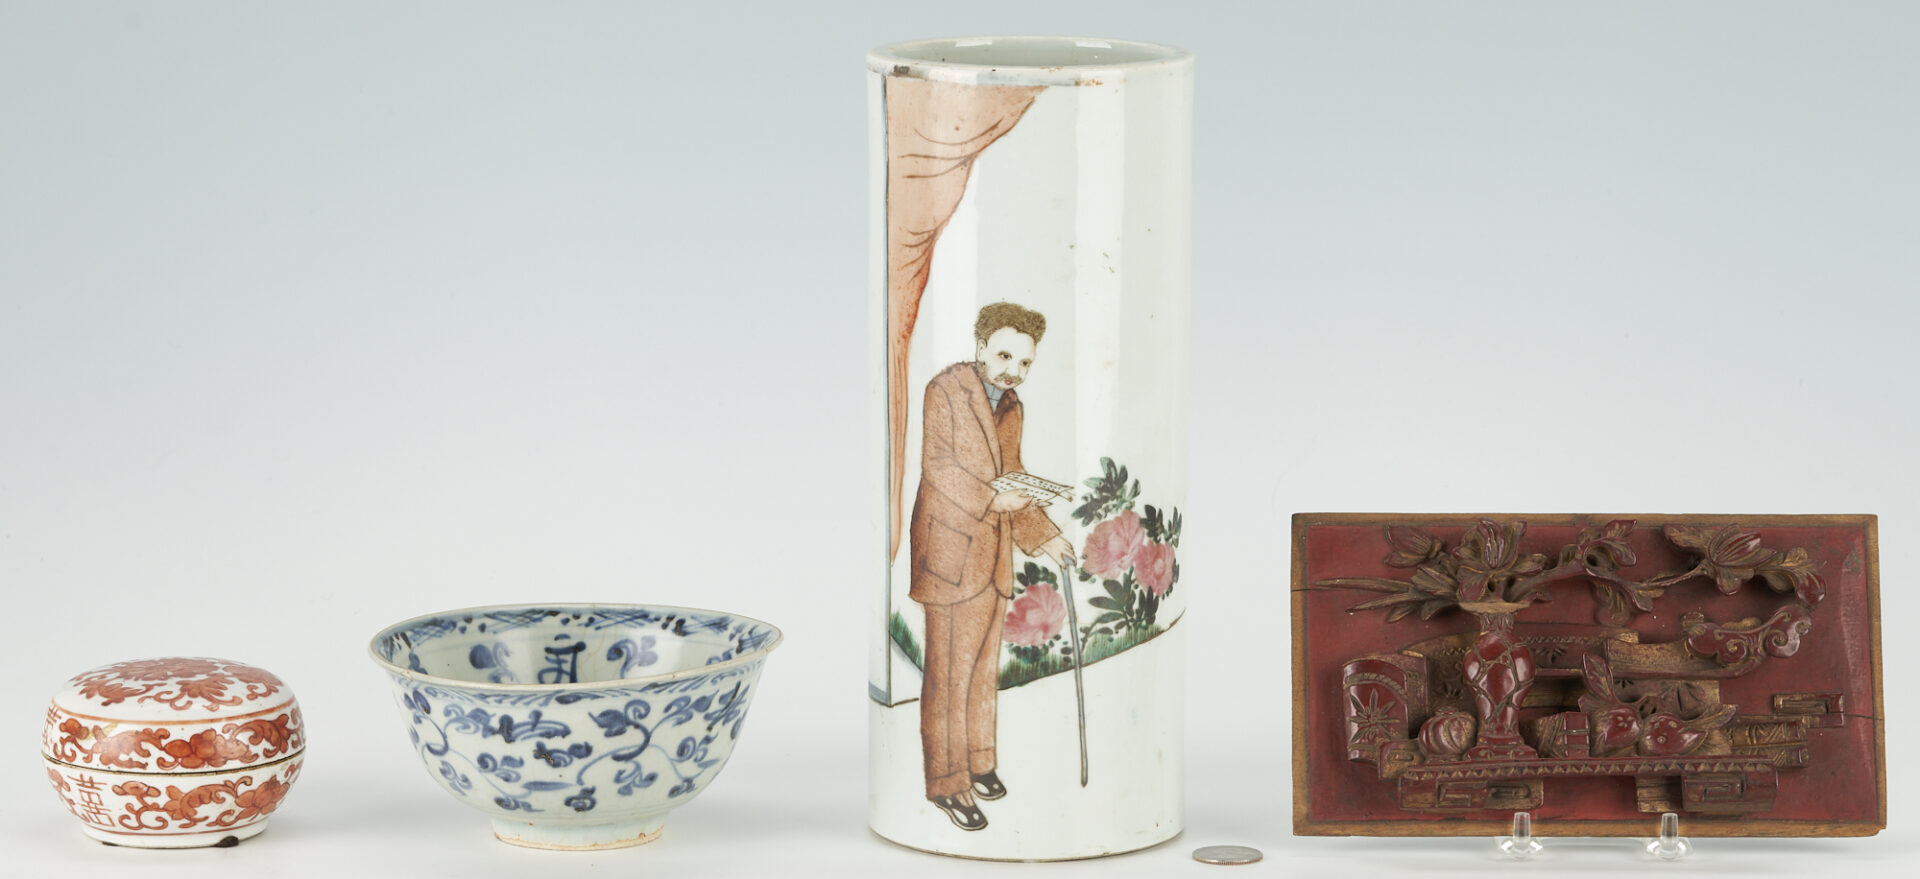 Lot 234: 4 Chinese Decorative Items, incl. Porcelain